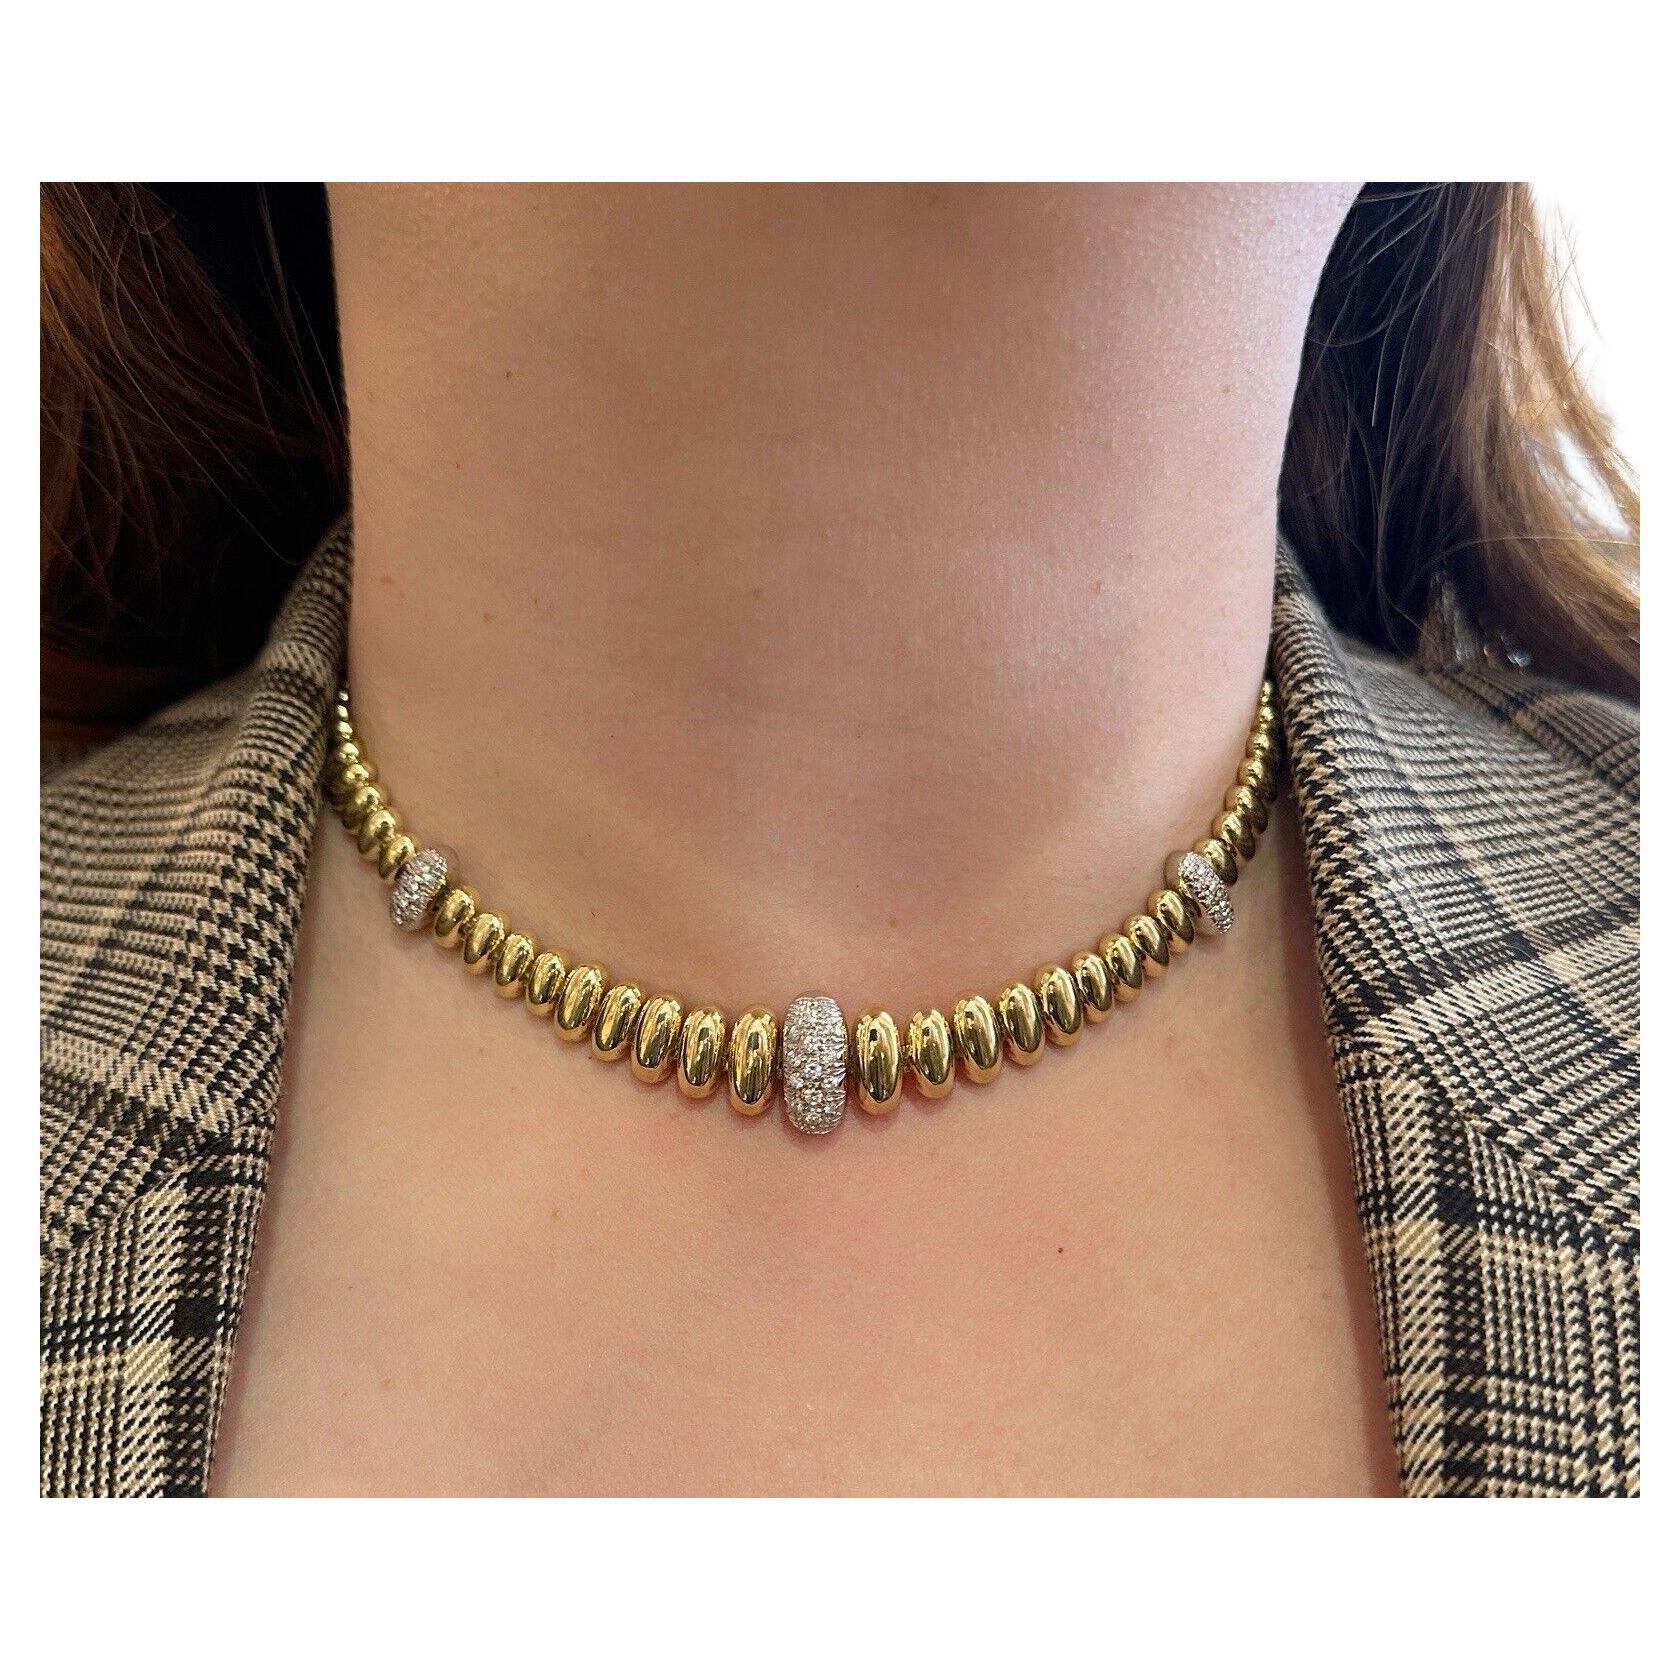 Oval Bead Link Choker Necklace with Diamond Links in 18k Yellow Gold

18k Yellow Gold Oval Bead Choker features elongated Oval-shaped Gold beads graduating in size, with three beads set with Pavé Diamonds in 18k Yellow Gold.

Total diamond weight 